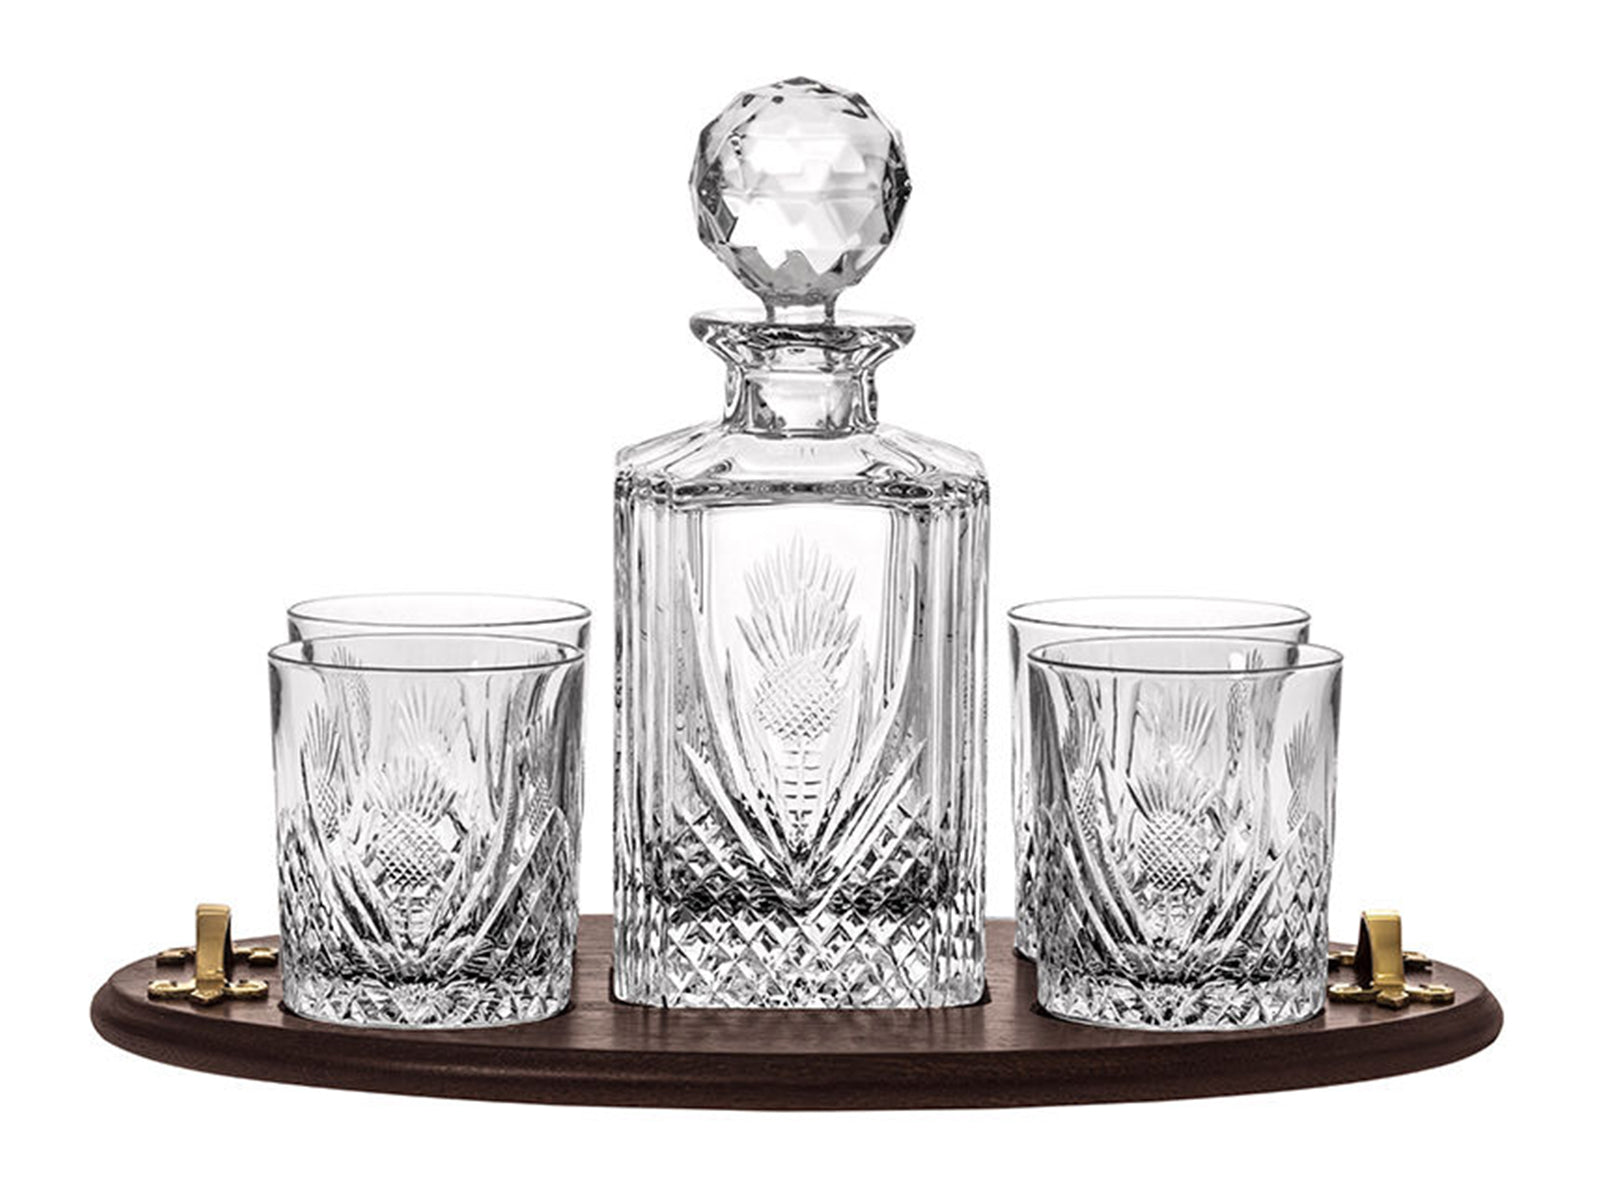 A crystal decanter and four matching glasses with a thistle design cut into the outside, sitting on an oak tray with gold handles